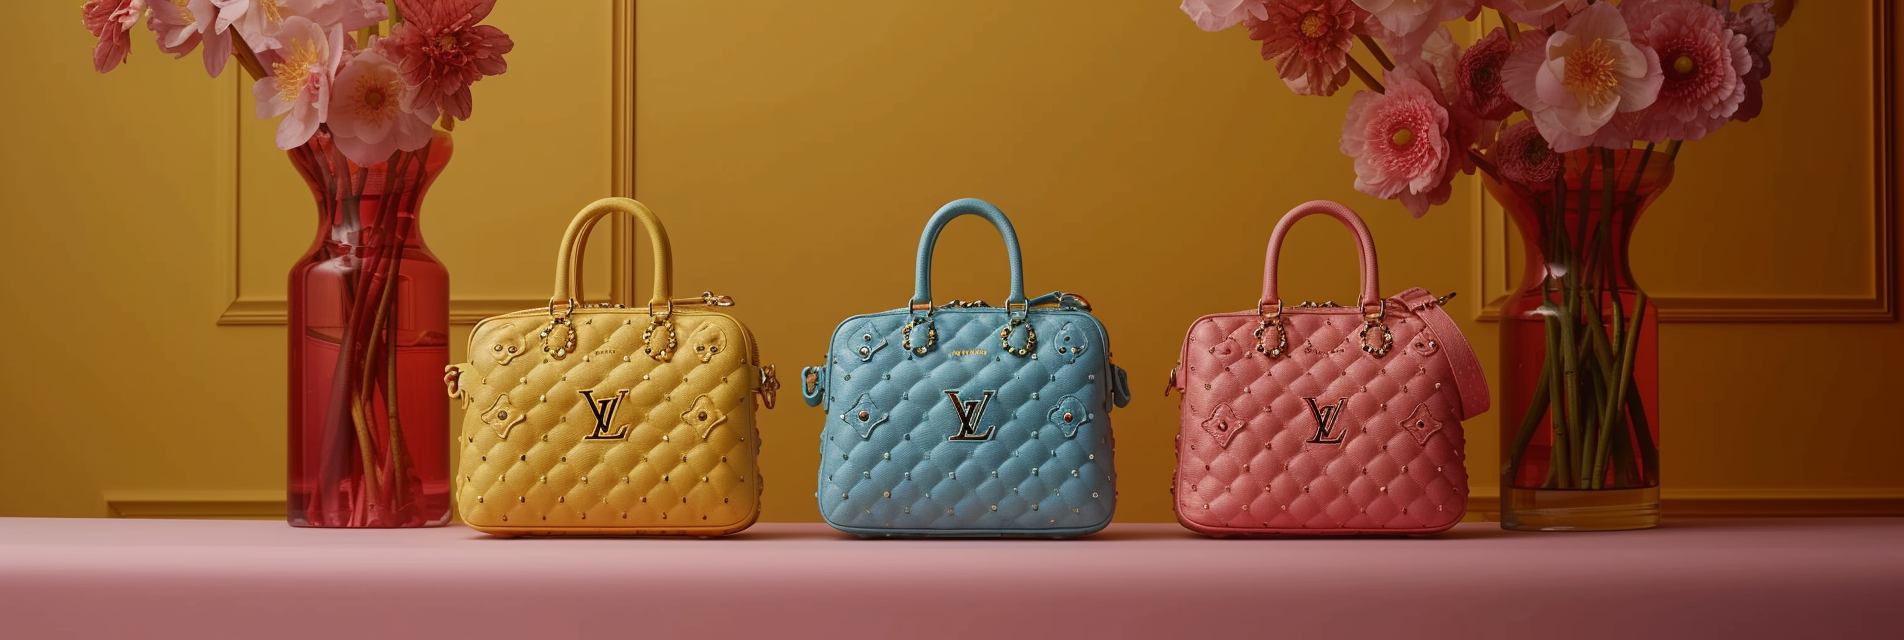 Louis Vuitton Handbags: A Timeless Investment and Vintage Haute Couture